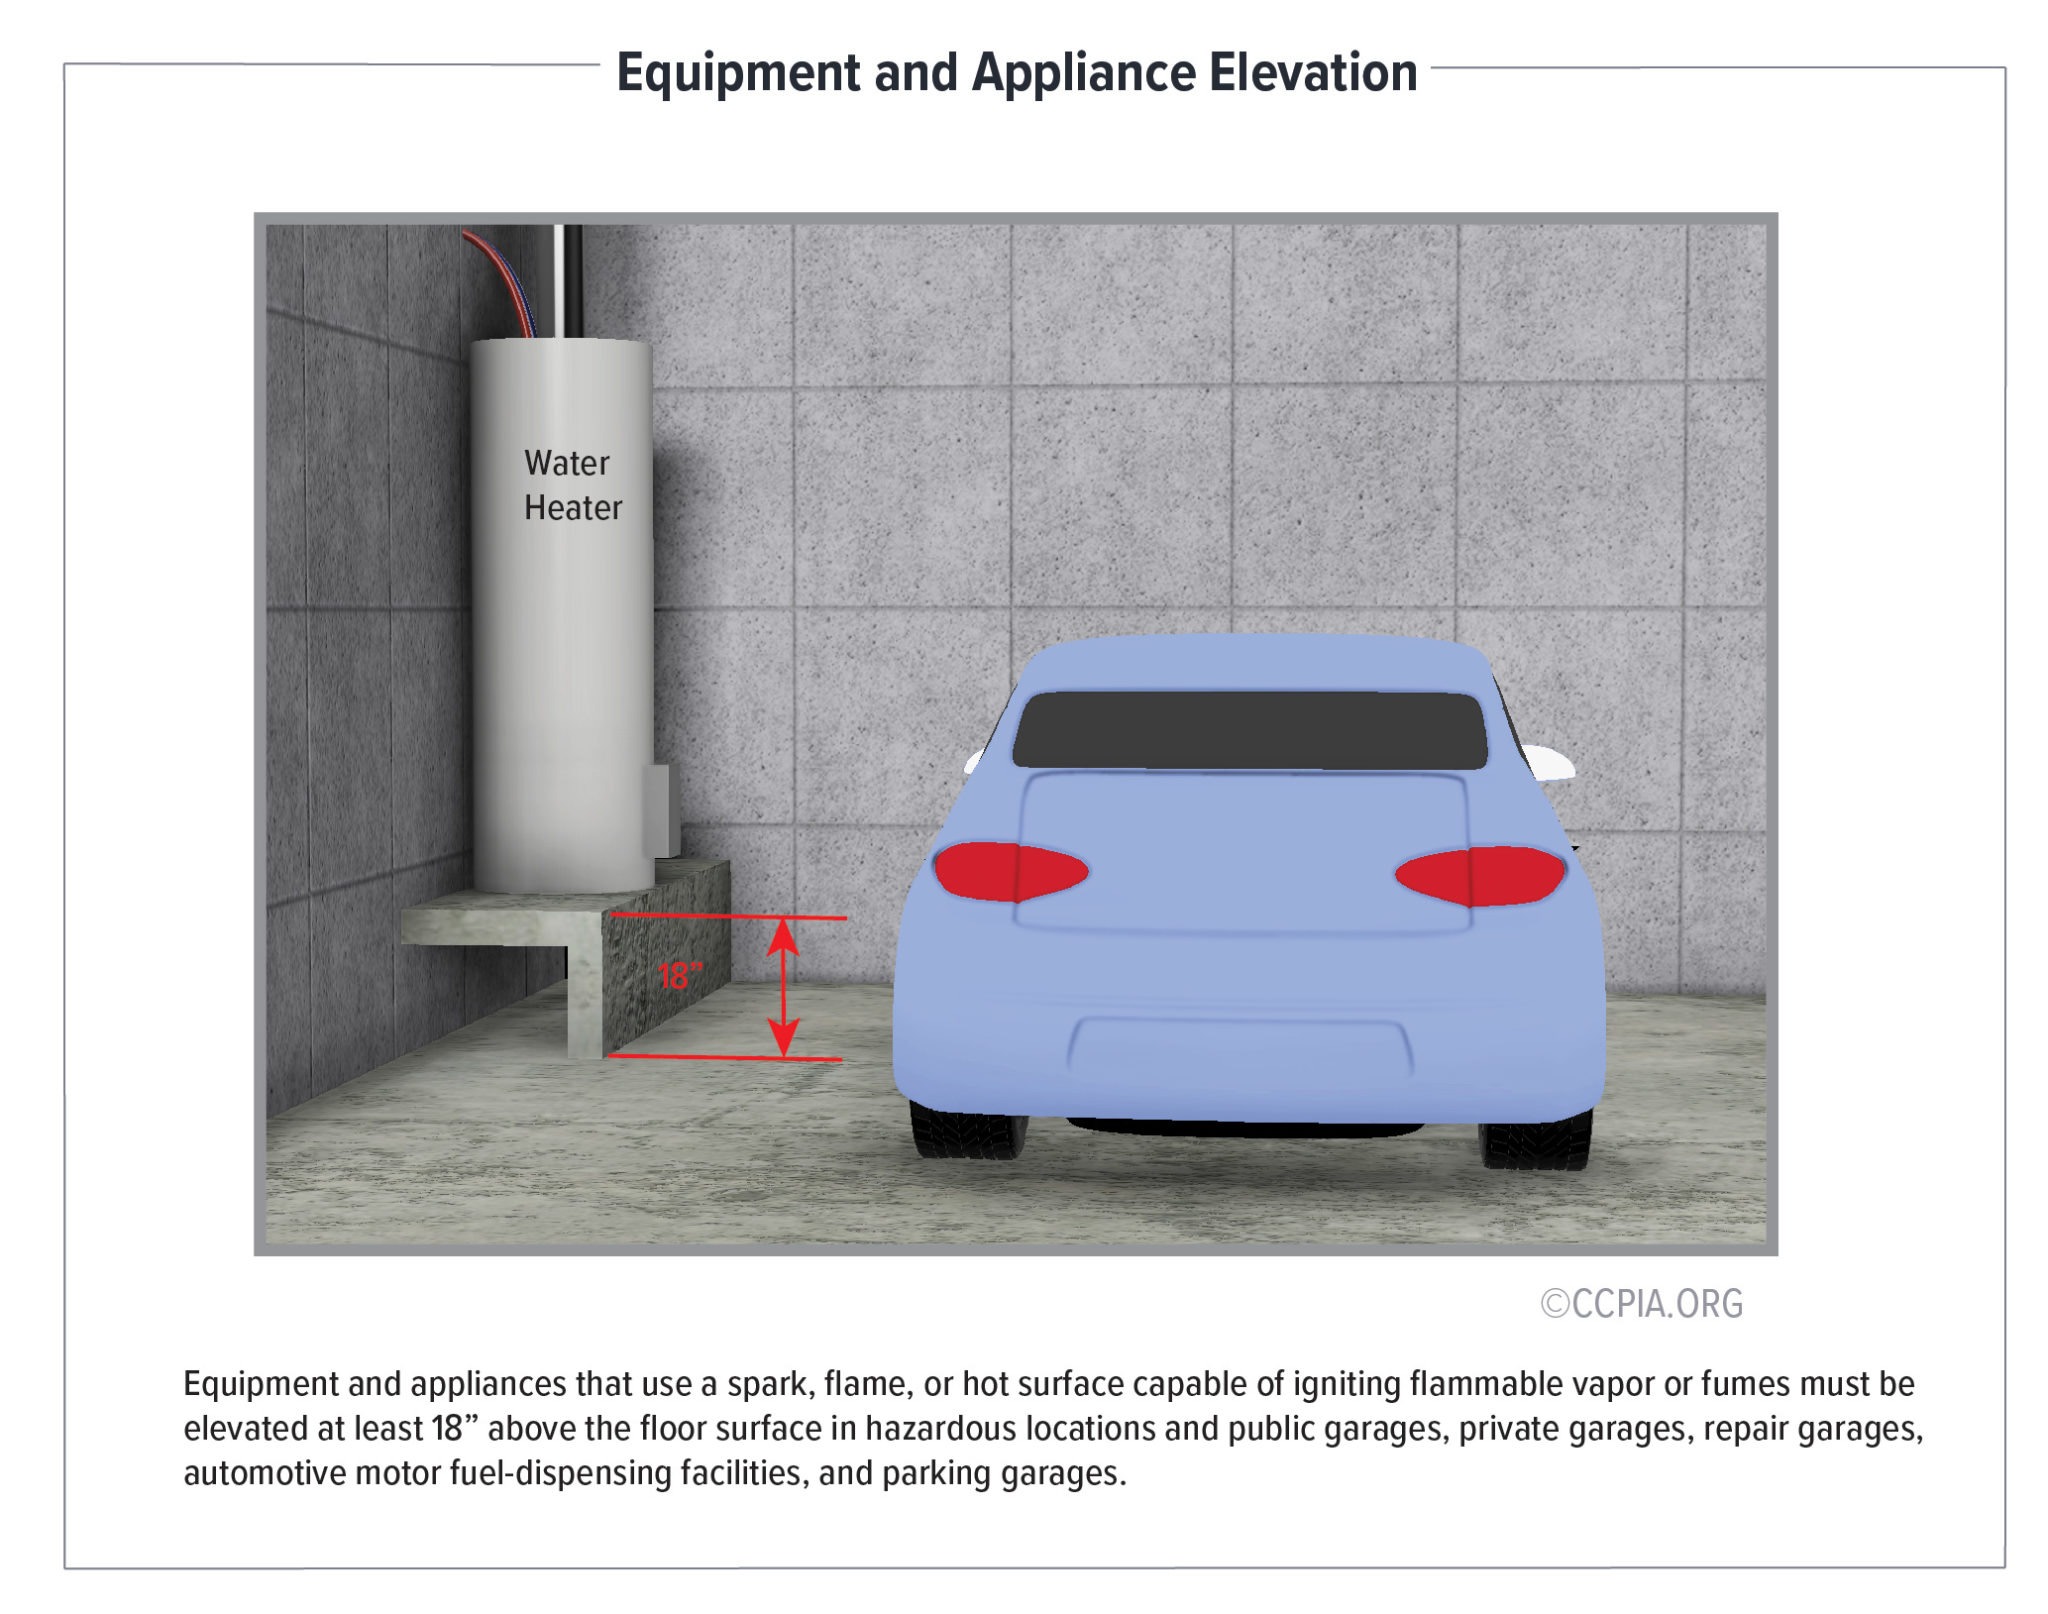 The image shows elevation requirements for certain equipment and appliances in commercial buildings, such as a water heater.